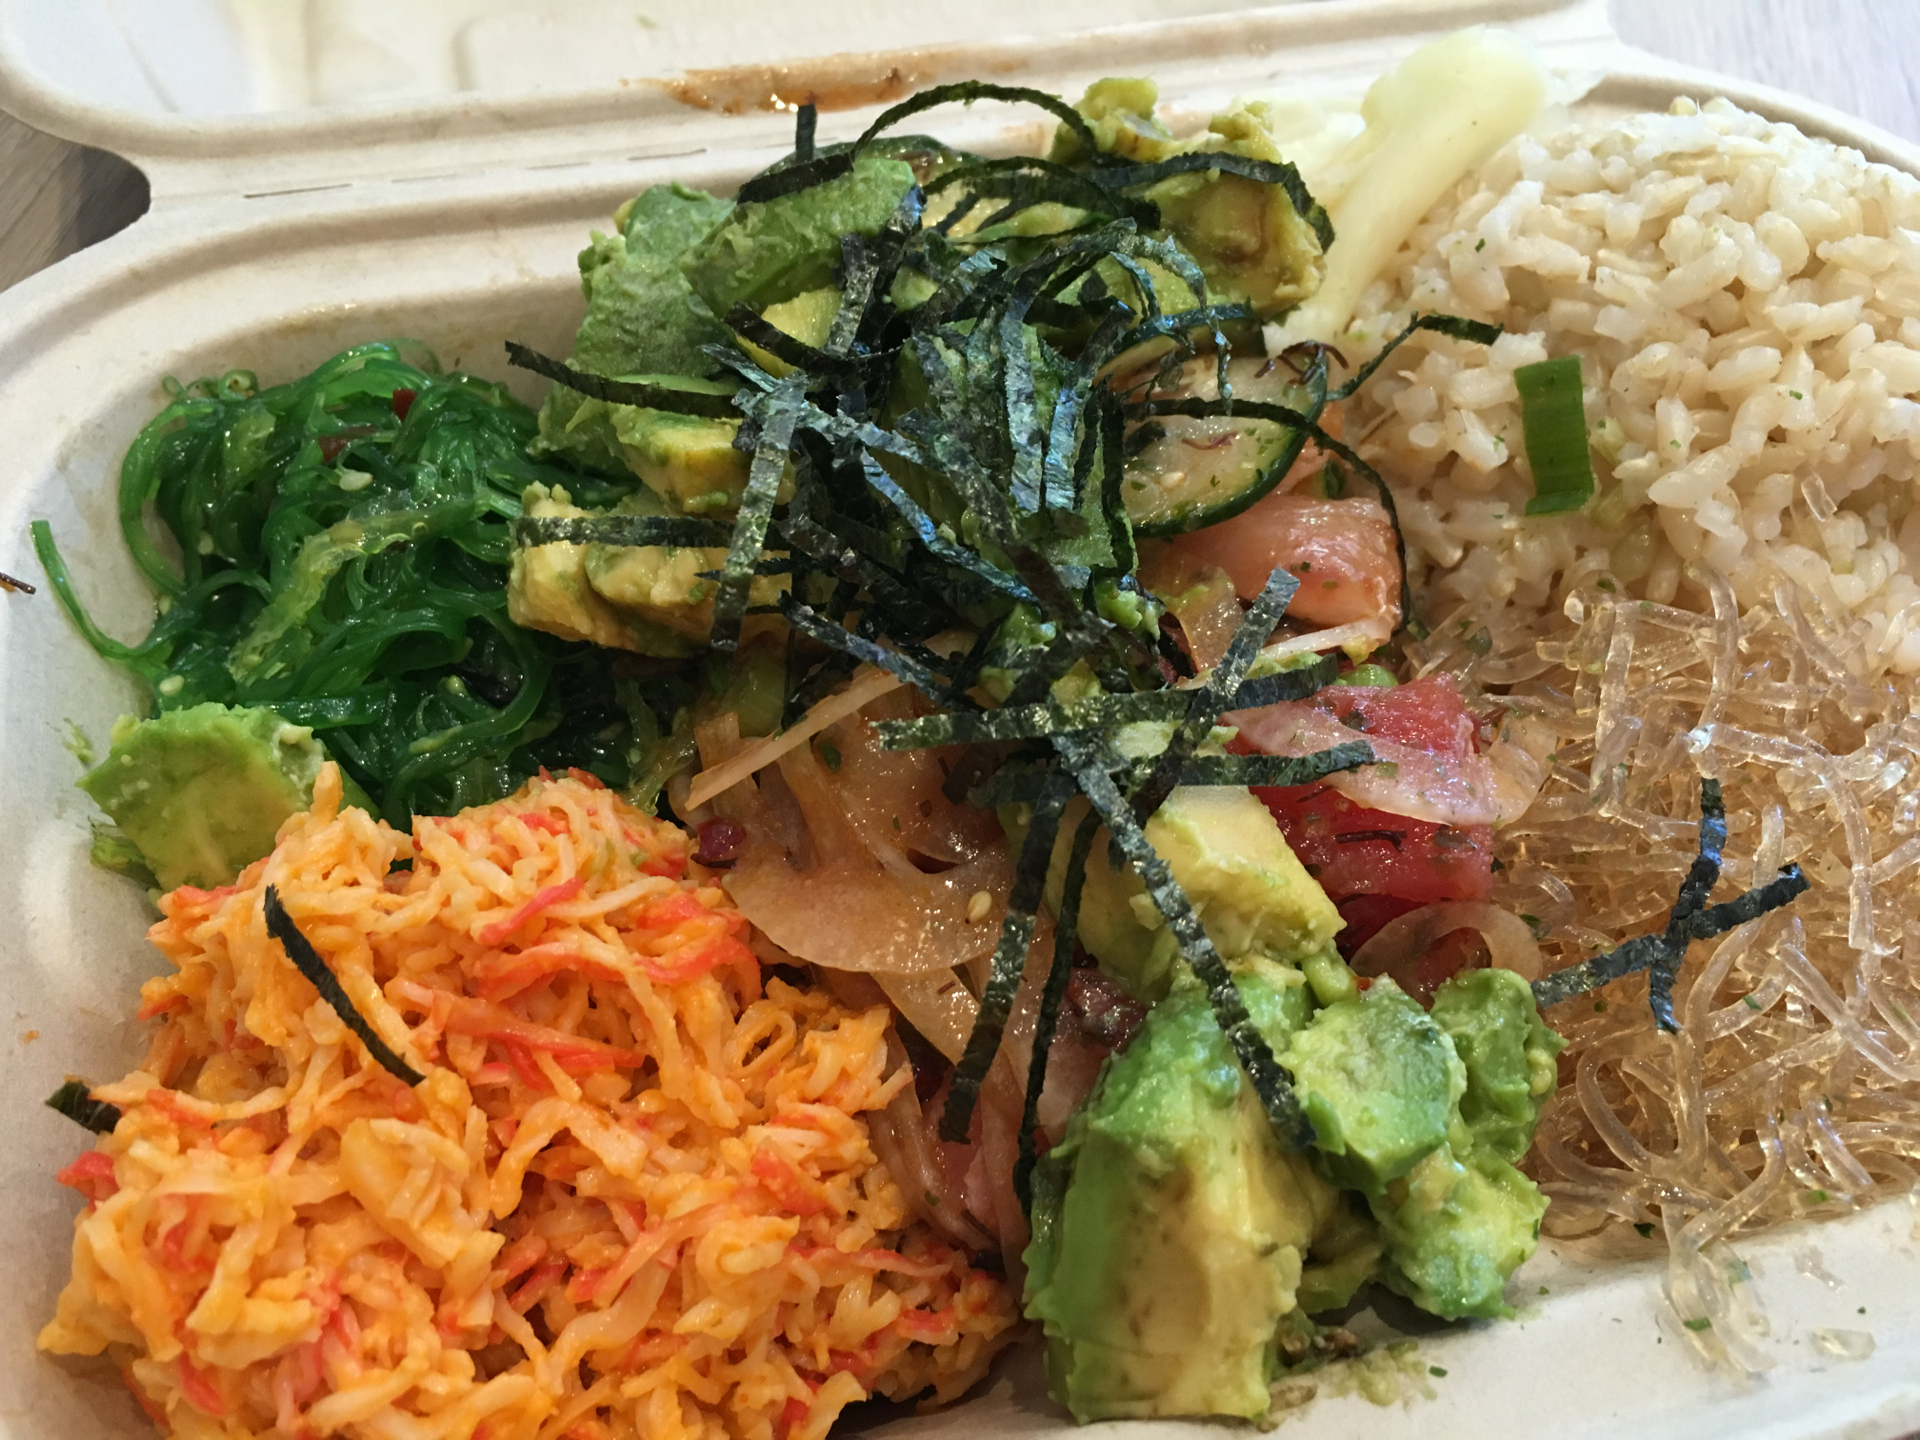 Ahi tuna over kelp noodles and brown rice with spicy crab salad and seaweed salad.